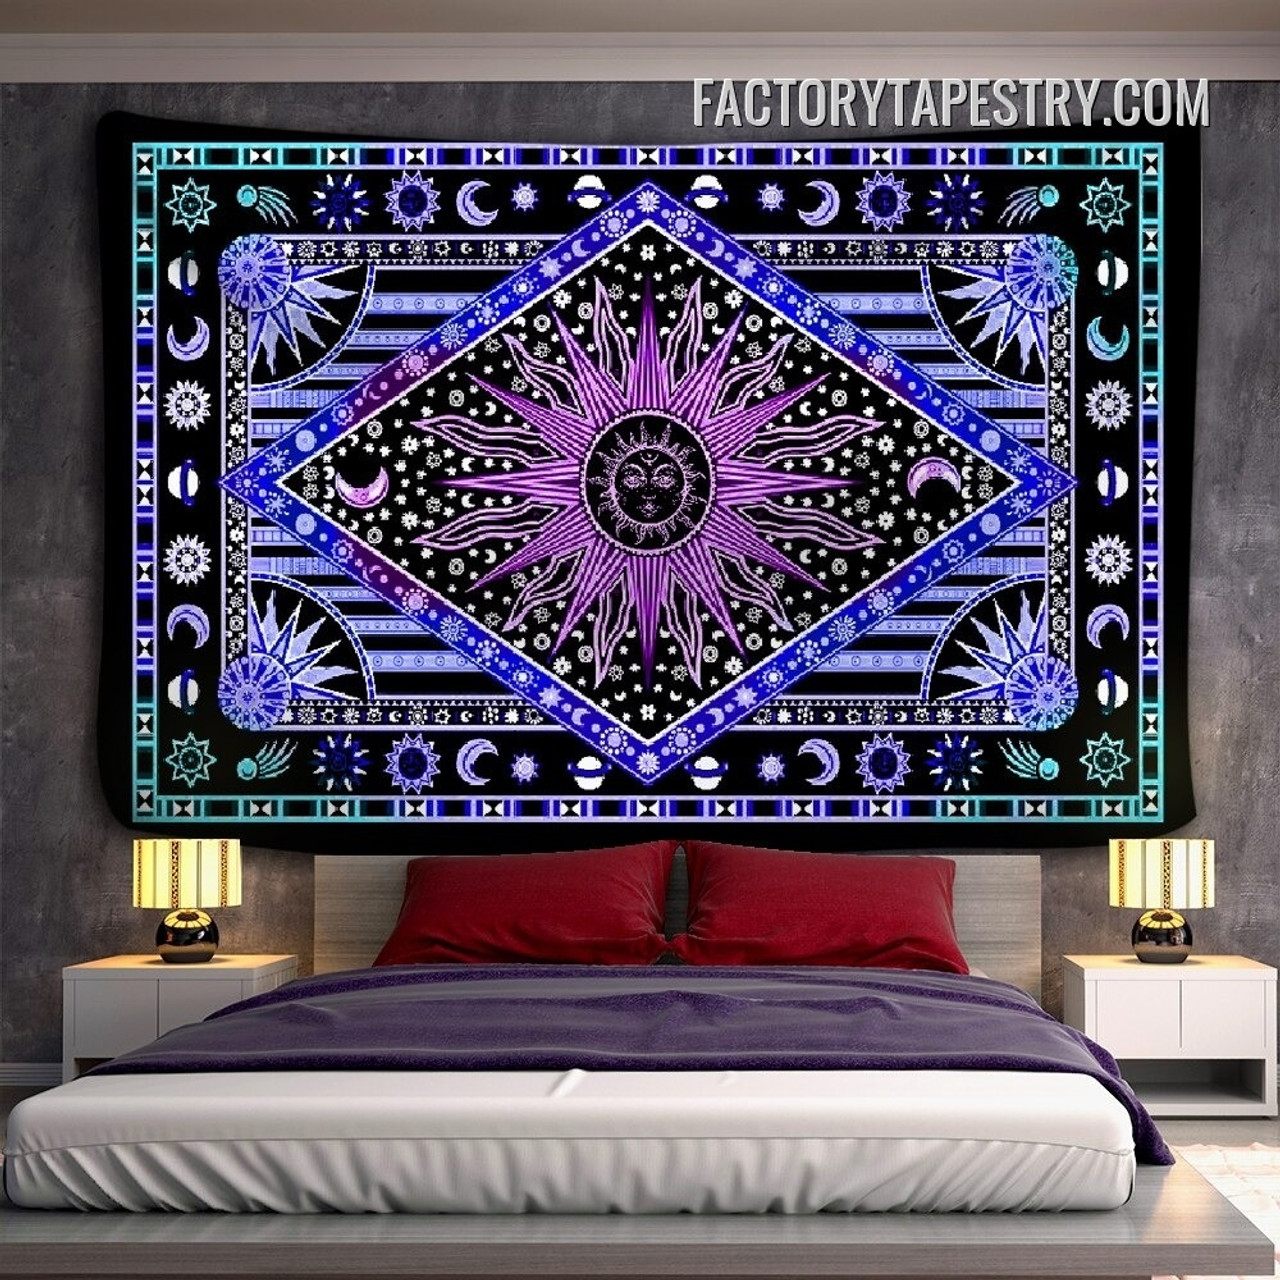 Celestial Sun Astrology Tarot Psychedelic Wall Hanging Tapestry for Bedroom Dorm Home Decoration